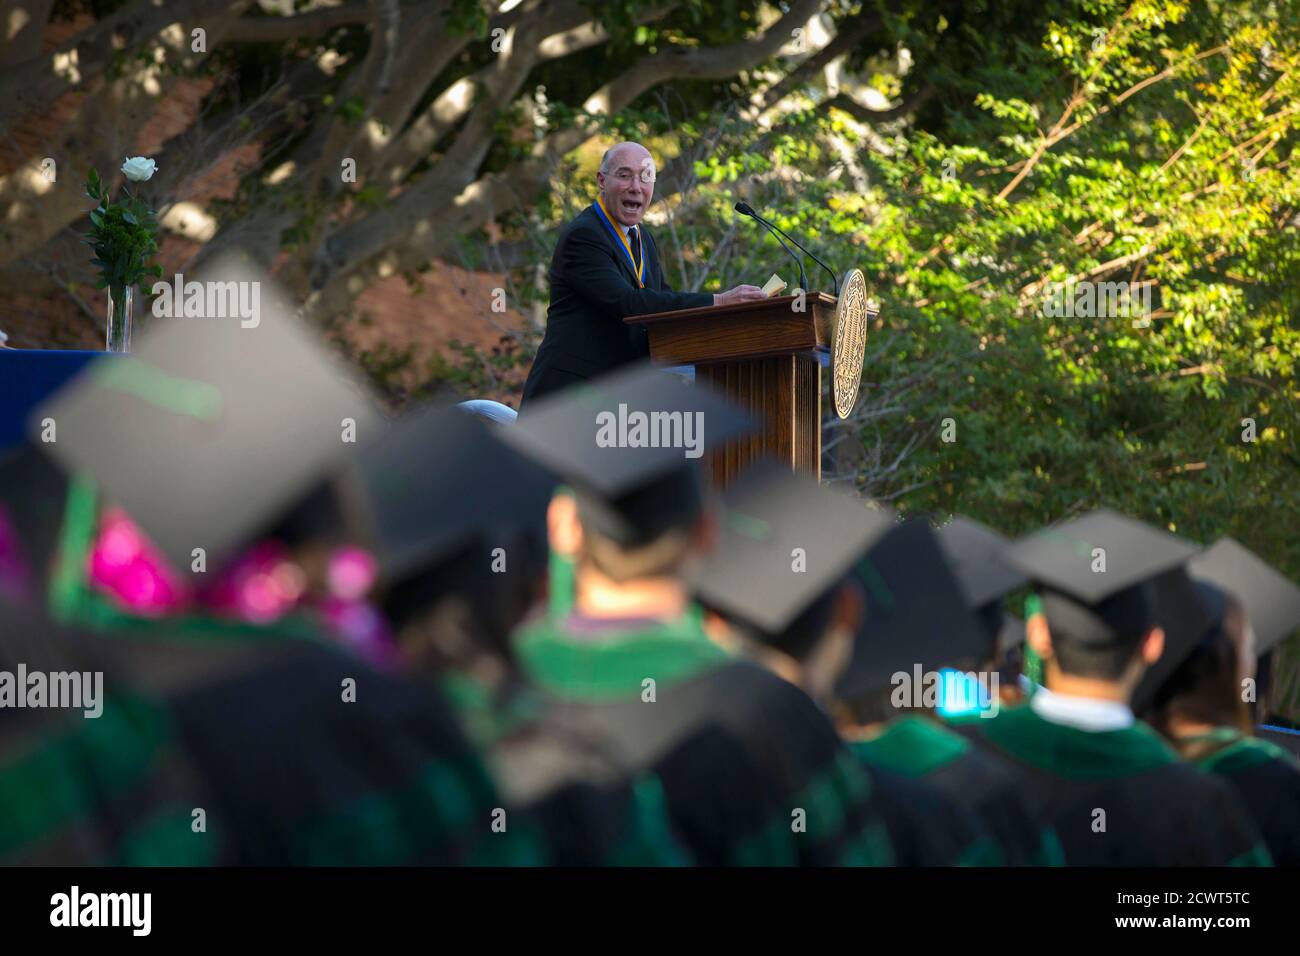 Philanthropist David Geffen speaks to graduates after receiving the UCLA Medal during the David Geffen School of Medicine at UCLA's Hippocratic Oath Ceremony in Los Angeles, California May 30, 2014.  REUTERS/Mario Anzuoni  (UNITED STATES - Tags: ENTERTAINMENT HEALTH EDUCATION POLITICS BUSINESS) Stock Photo